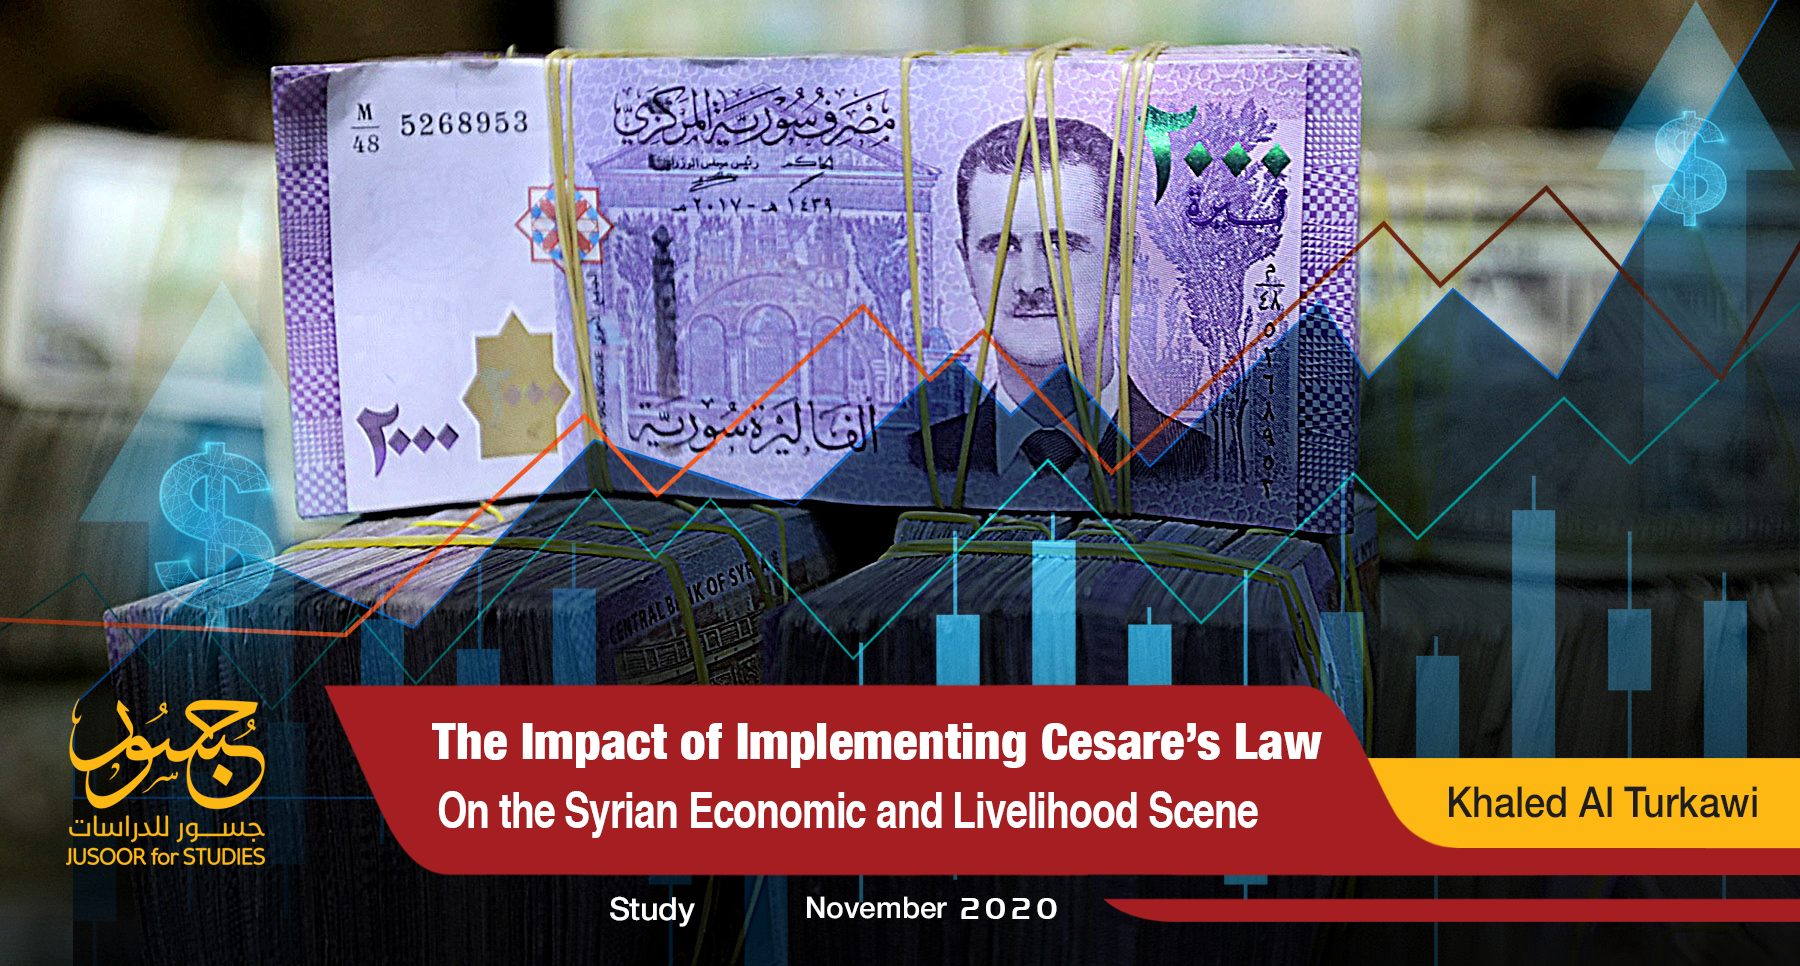 The Impact of Implementing Cesare’s Law On the Syrian Economic and Livelihood Scene